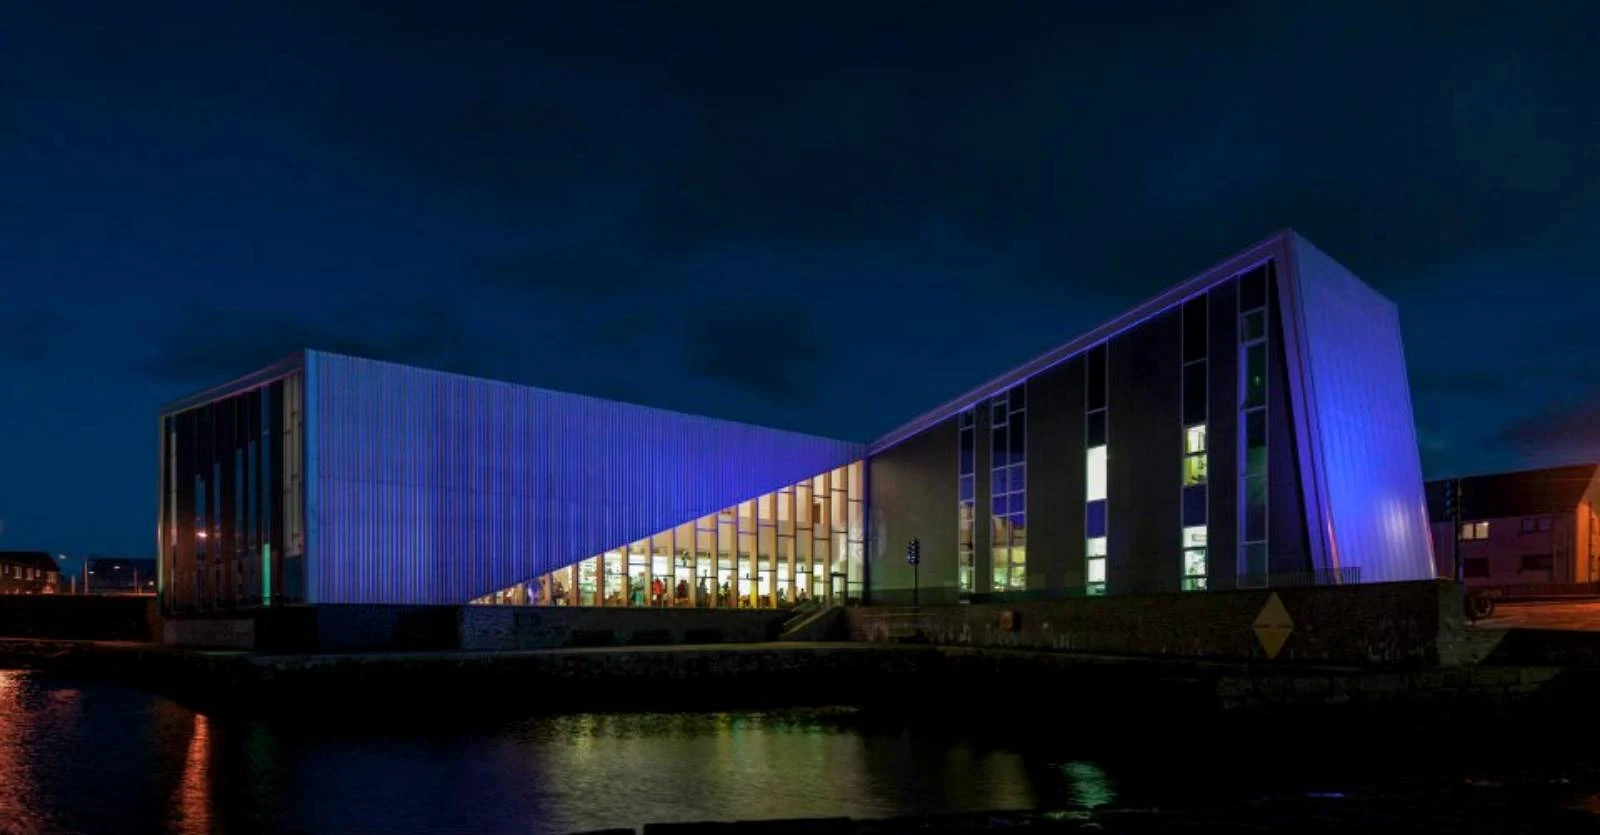 Mareel Arts Centre by Gareth Hoskins Architects